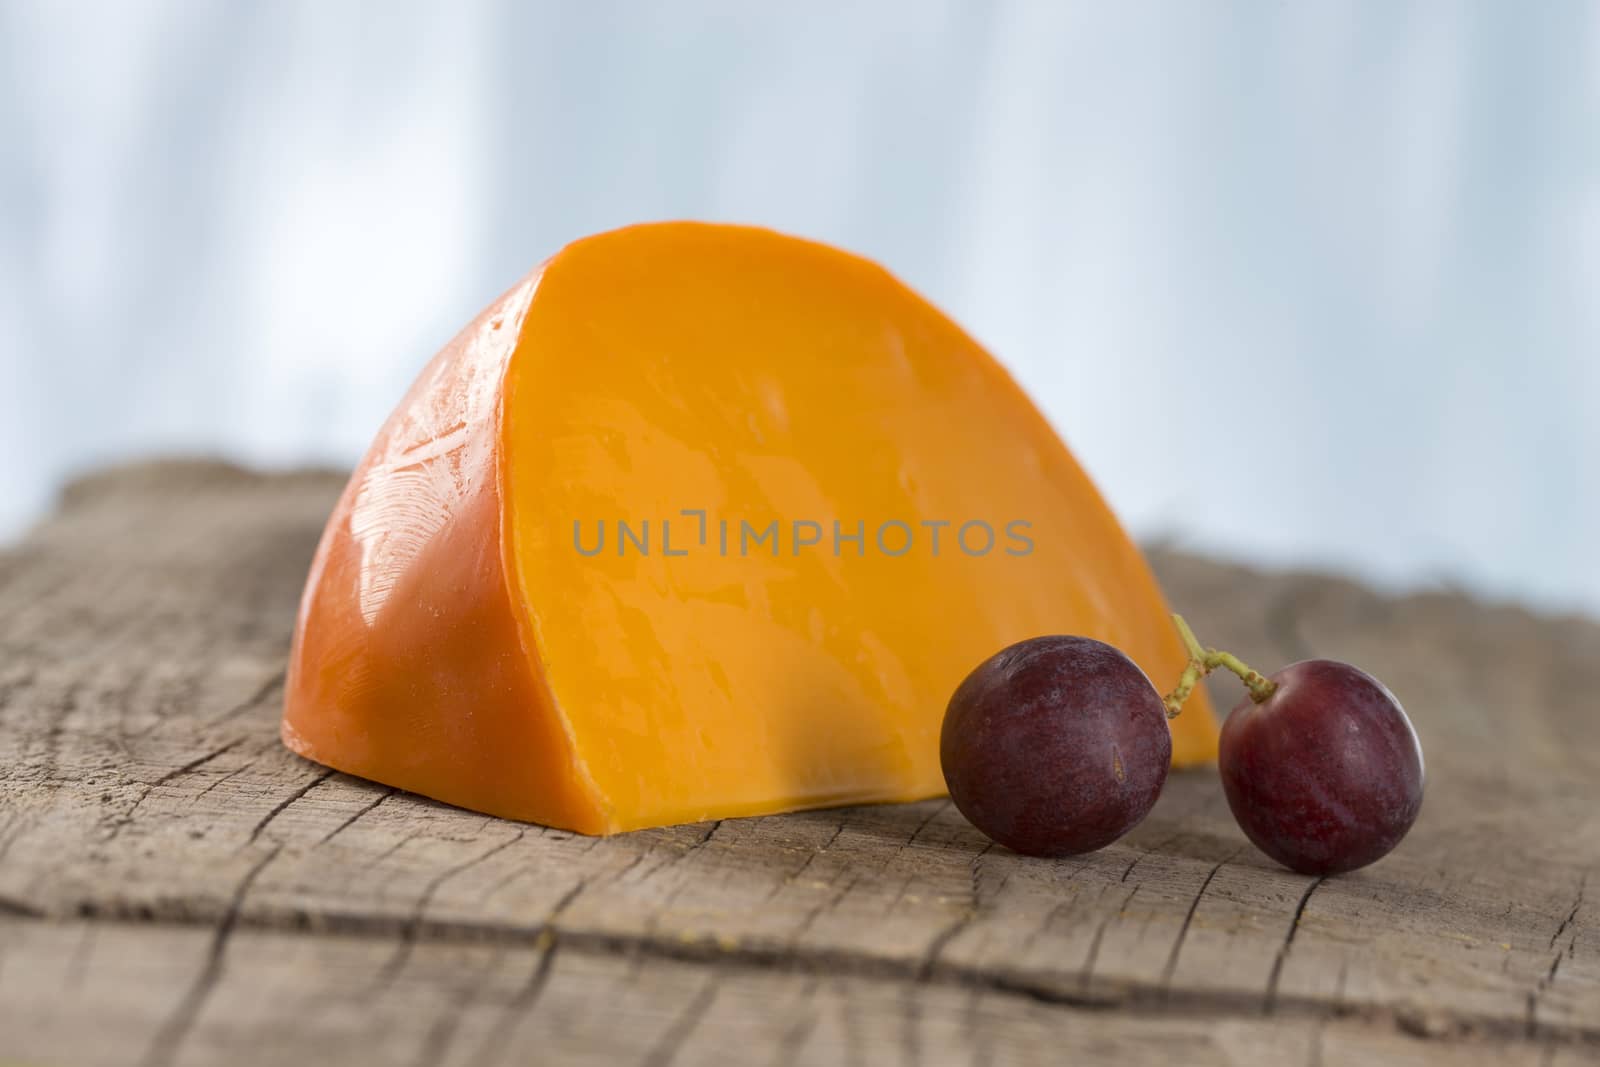 Hollander cheese - portion of Mimolette by JPC-PROD